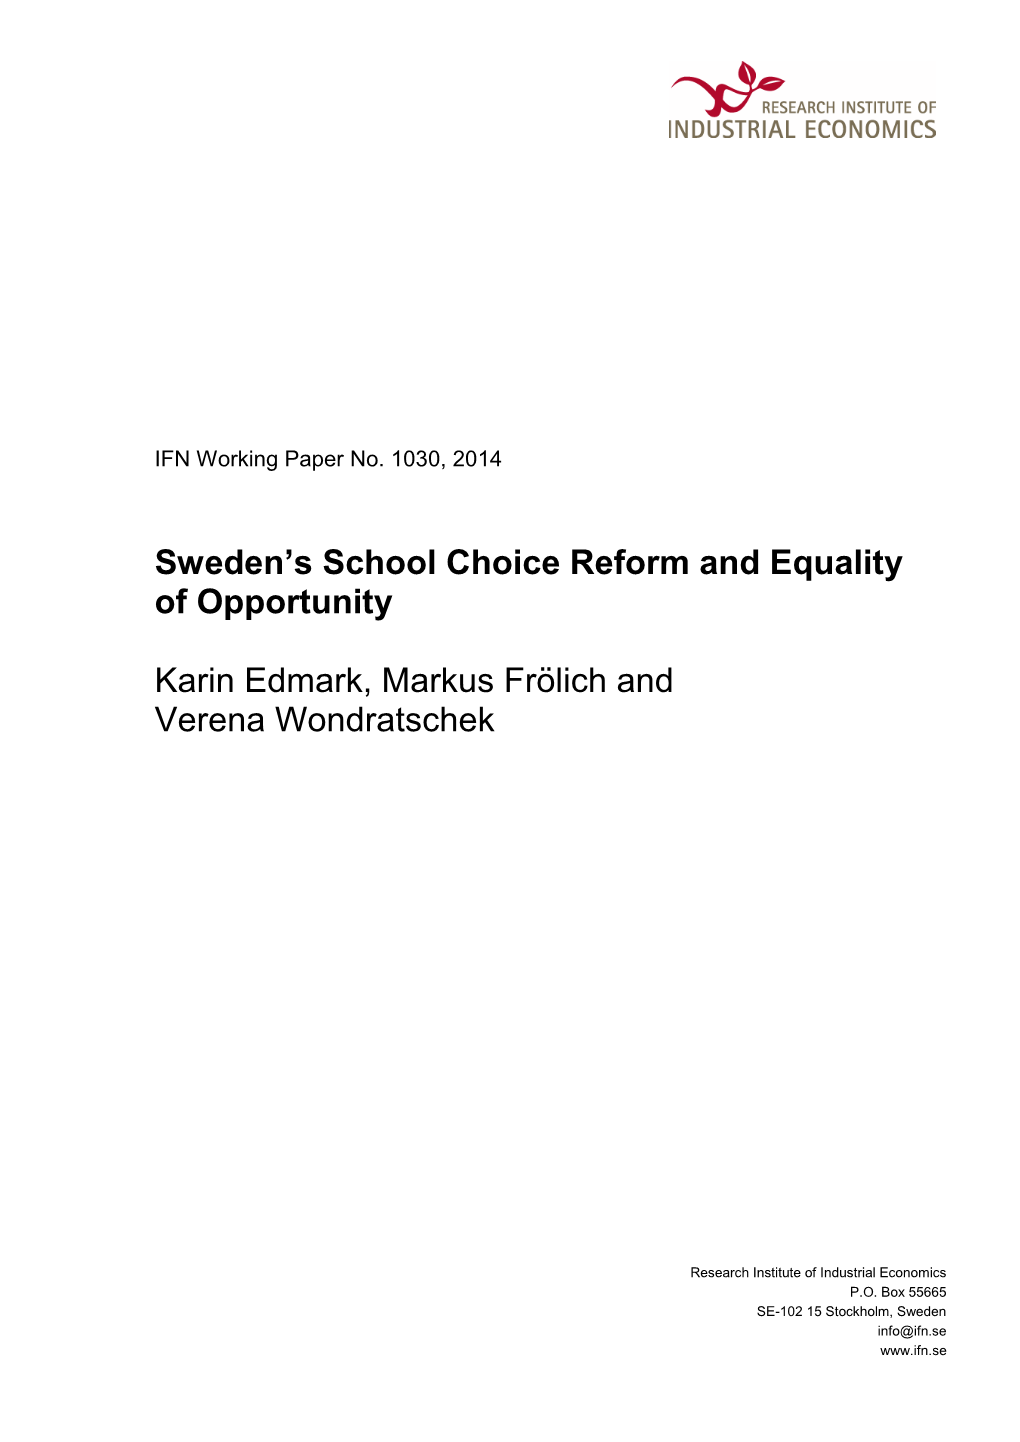 Sweden's School Choice Reform and Equality of Opportunity Karin